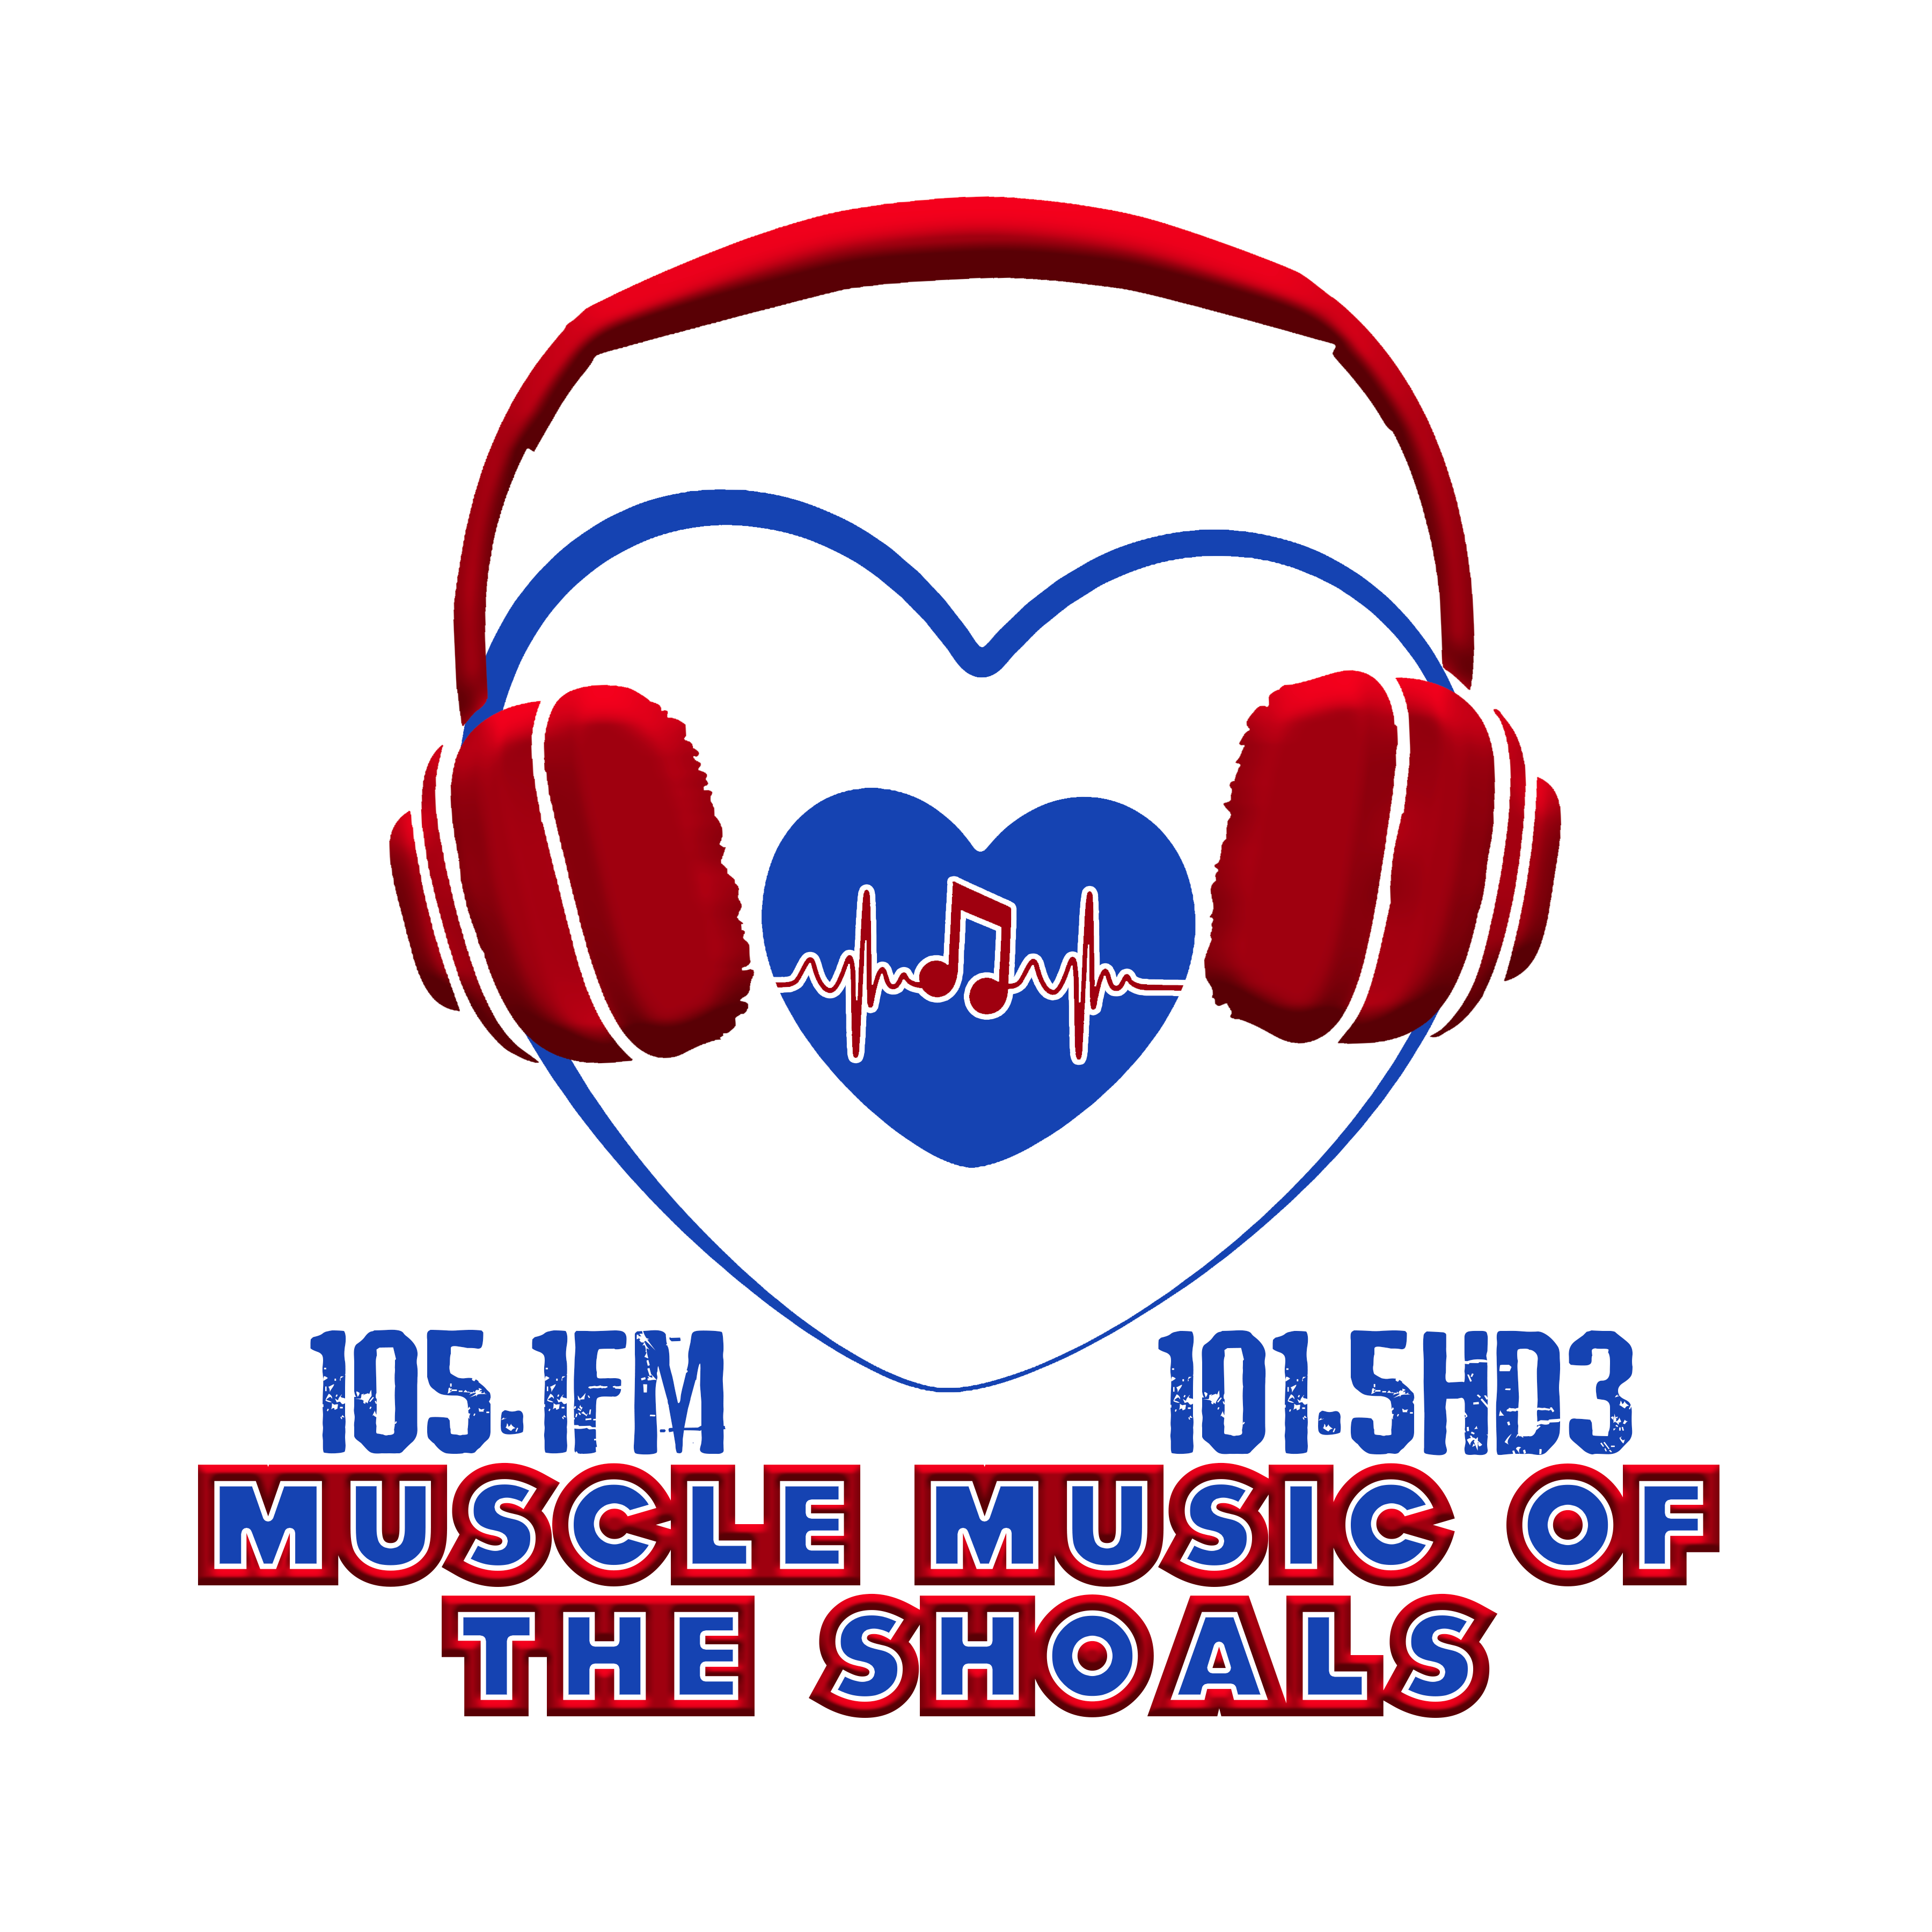 105.1 Fm Music Muscle of the Shoals